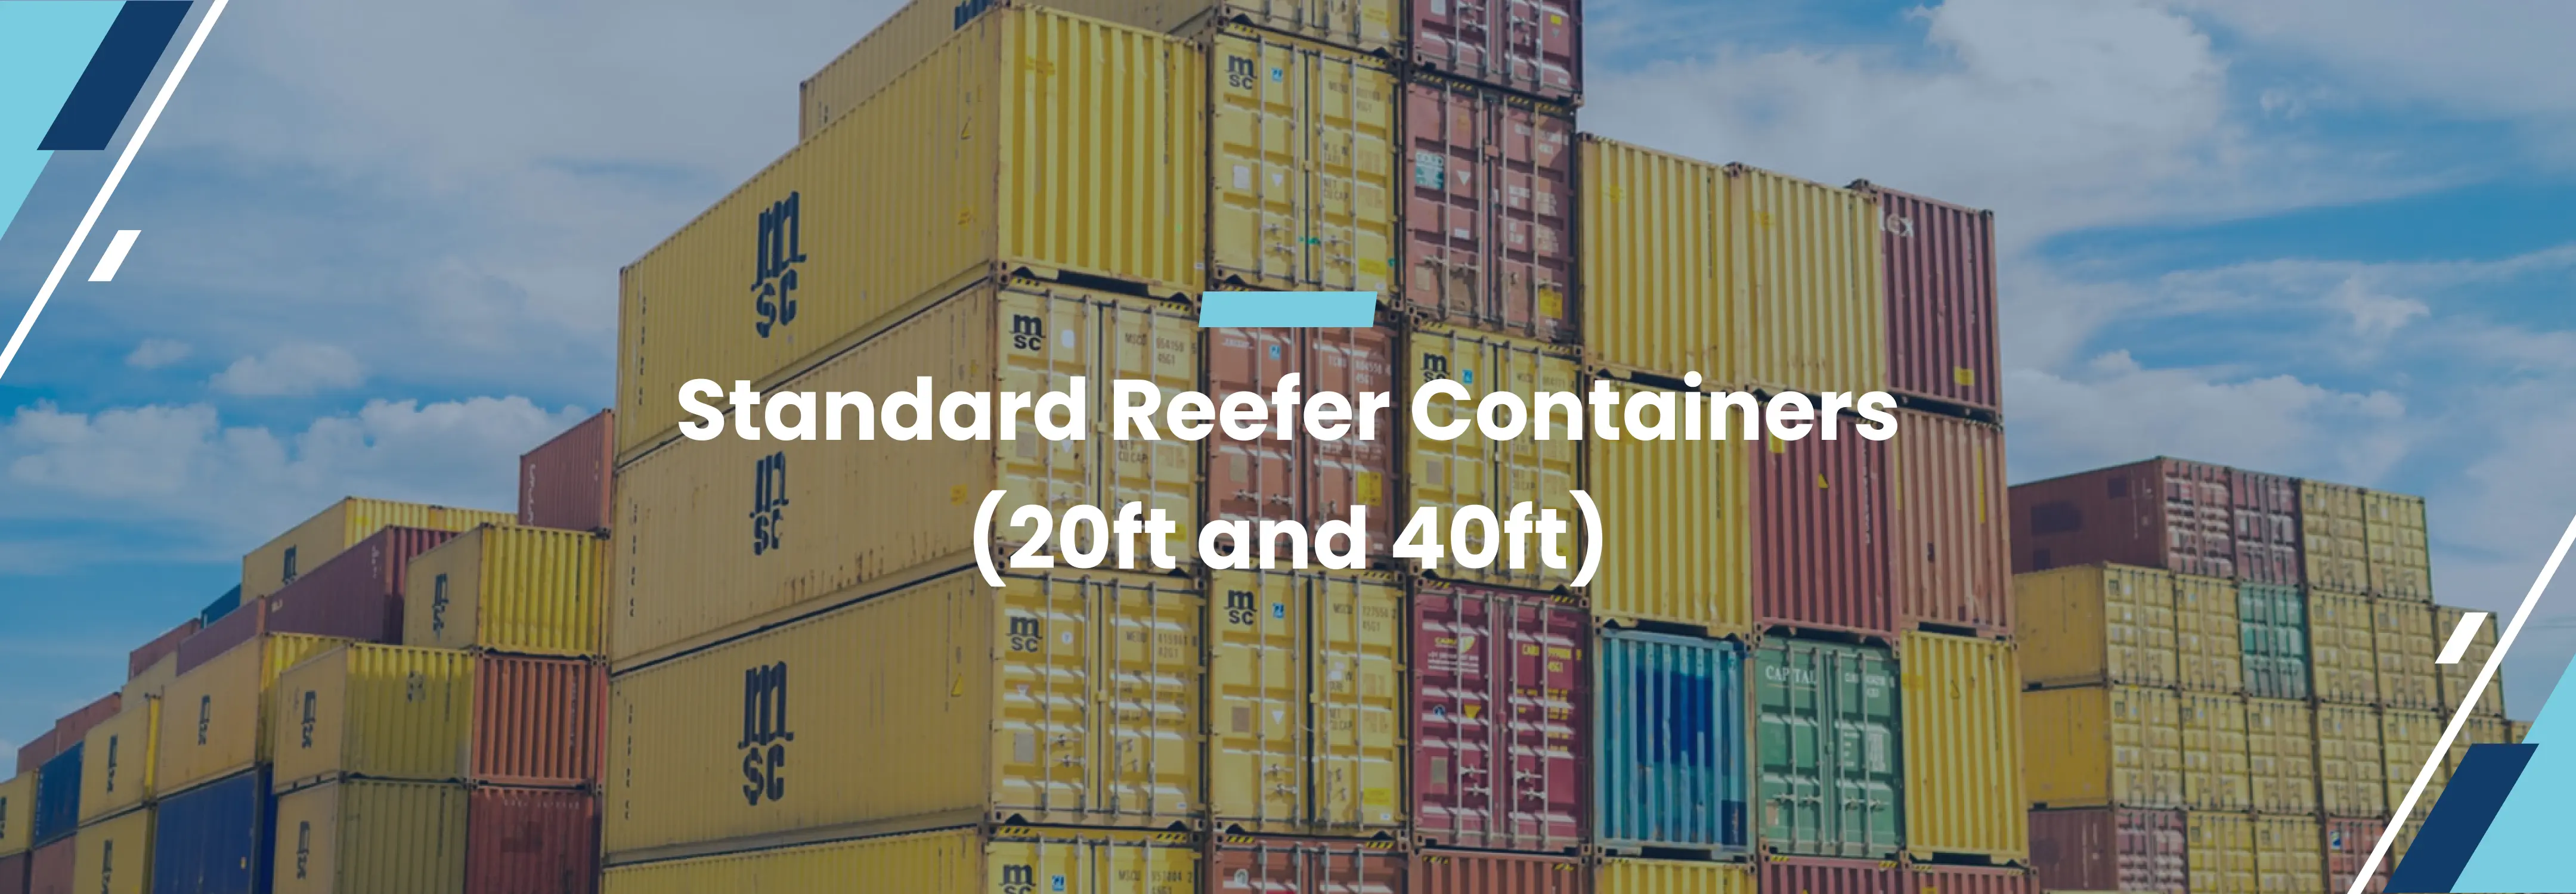 Banner of Standard Reefer Containers